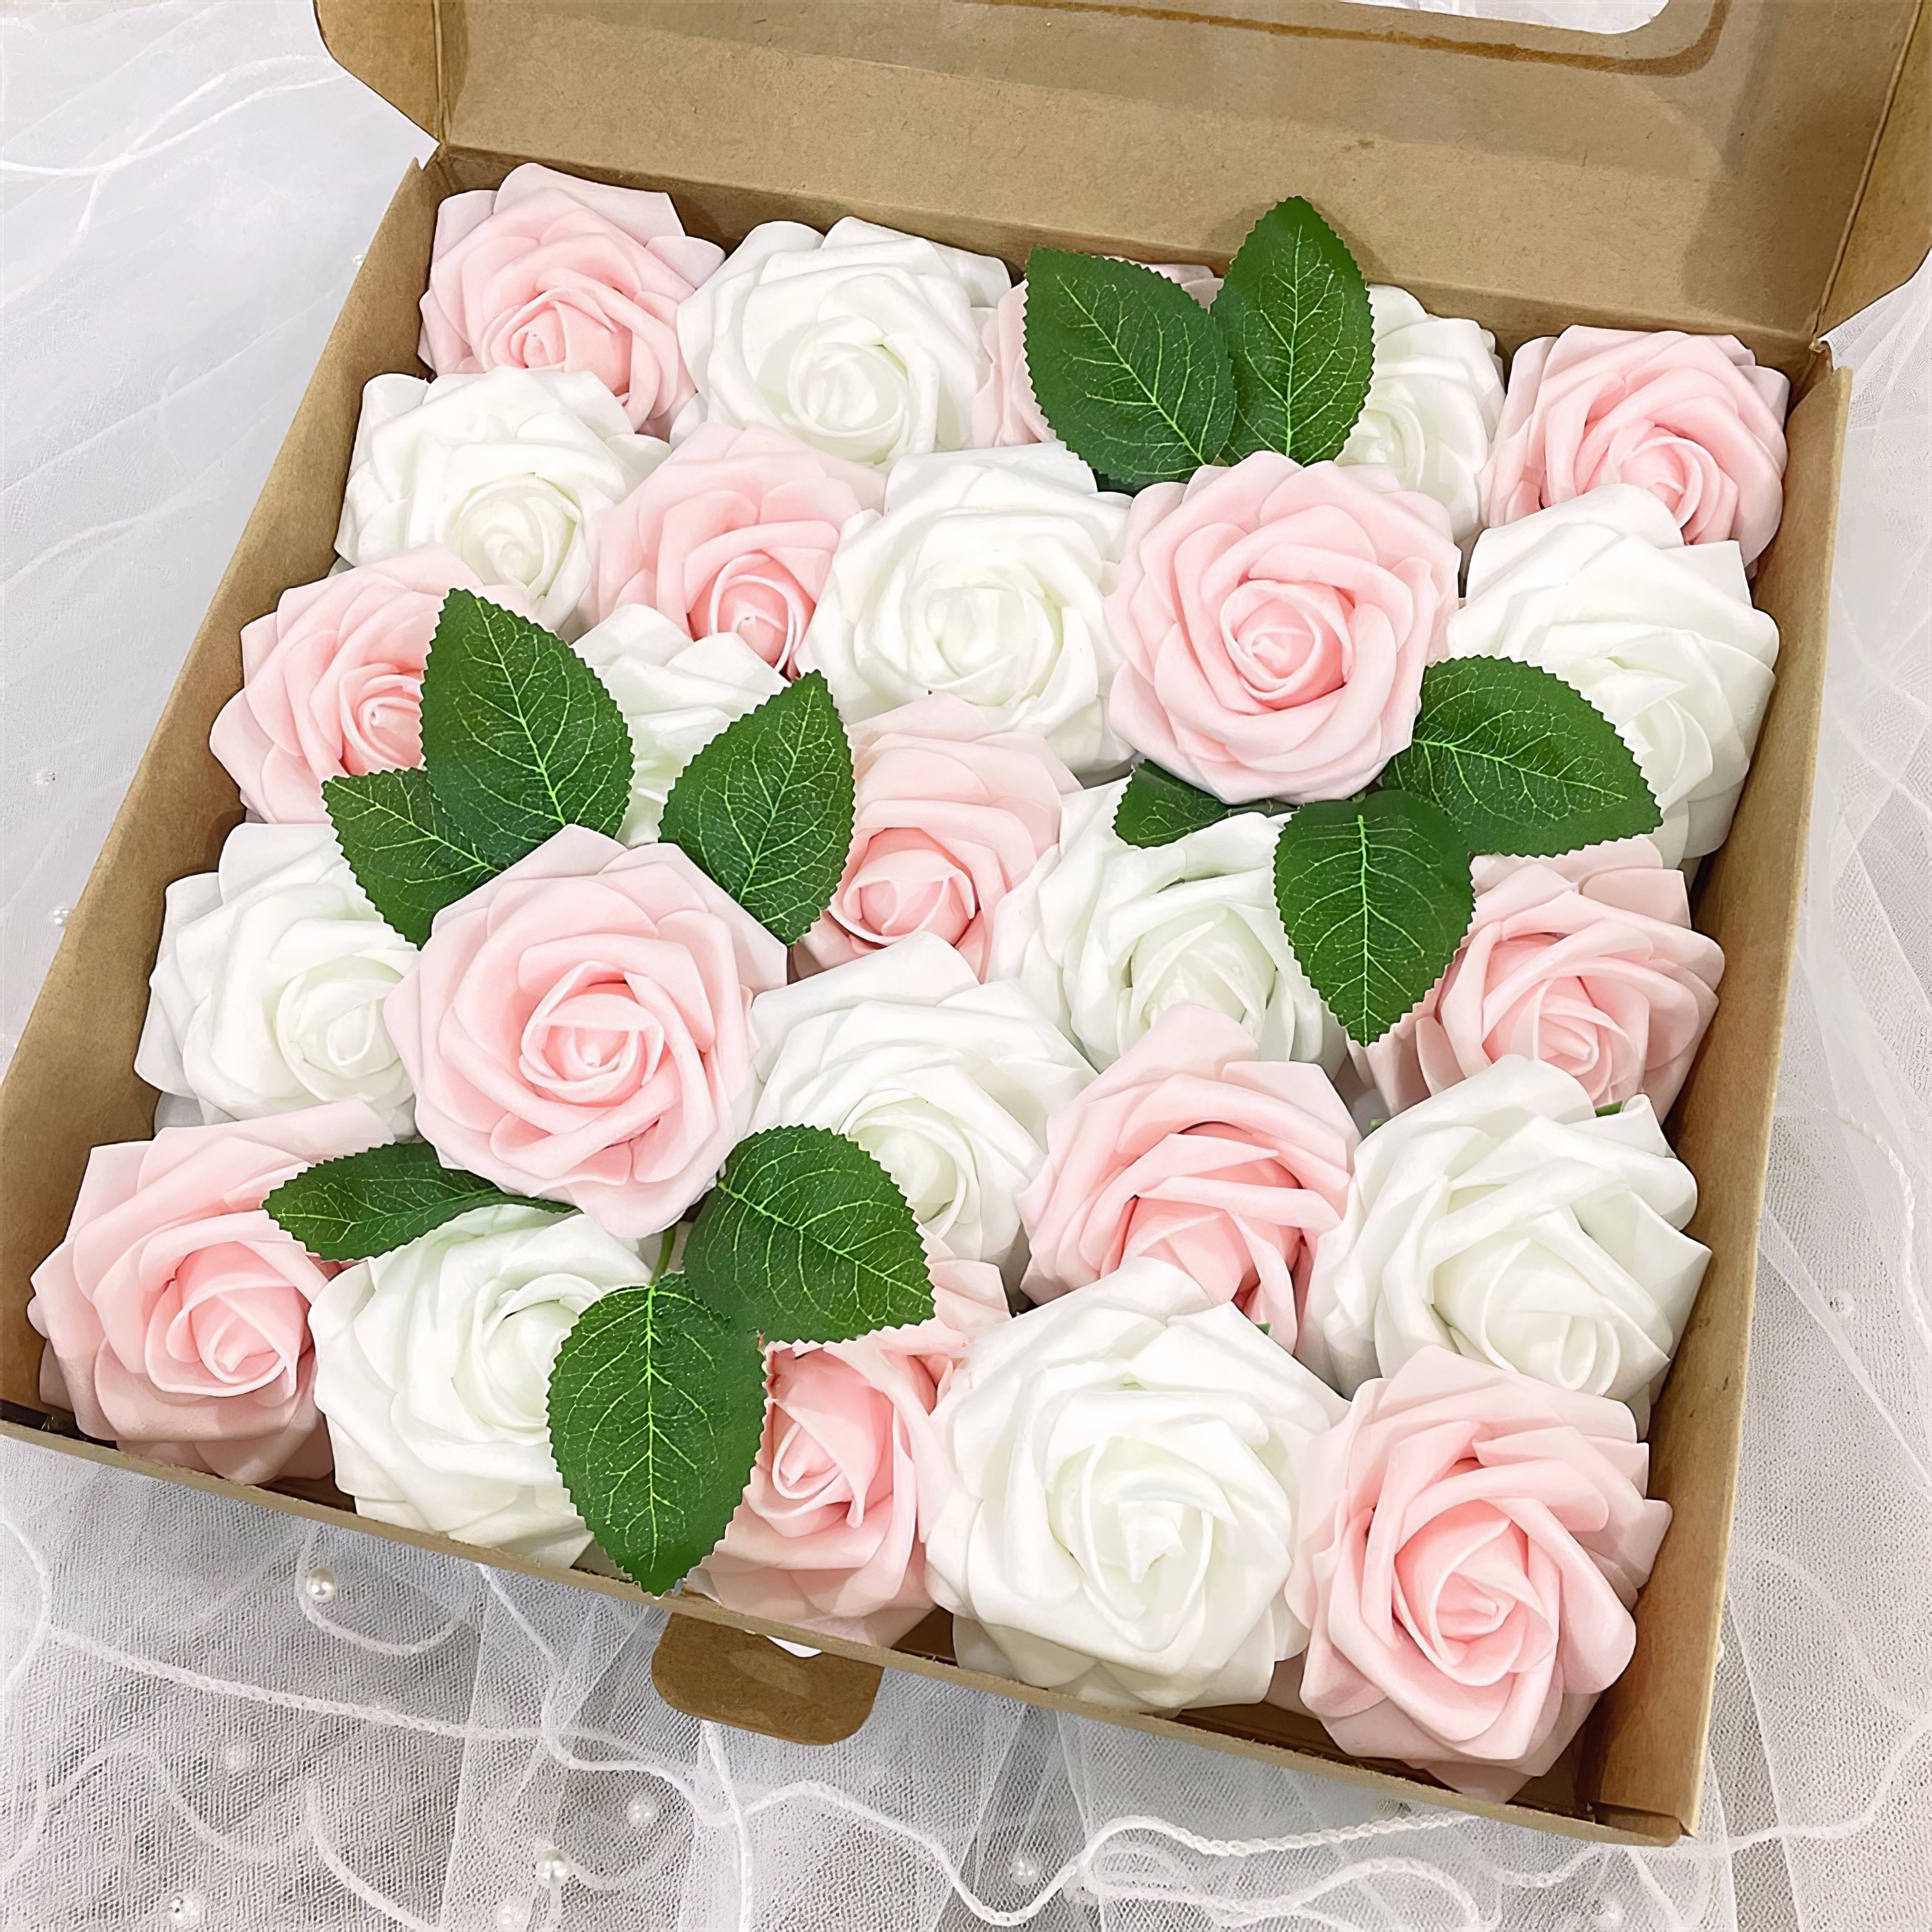 Flower Box Silk Flower Mixed Color Roses Series for Wedding Party Decor Proposal